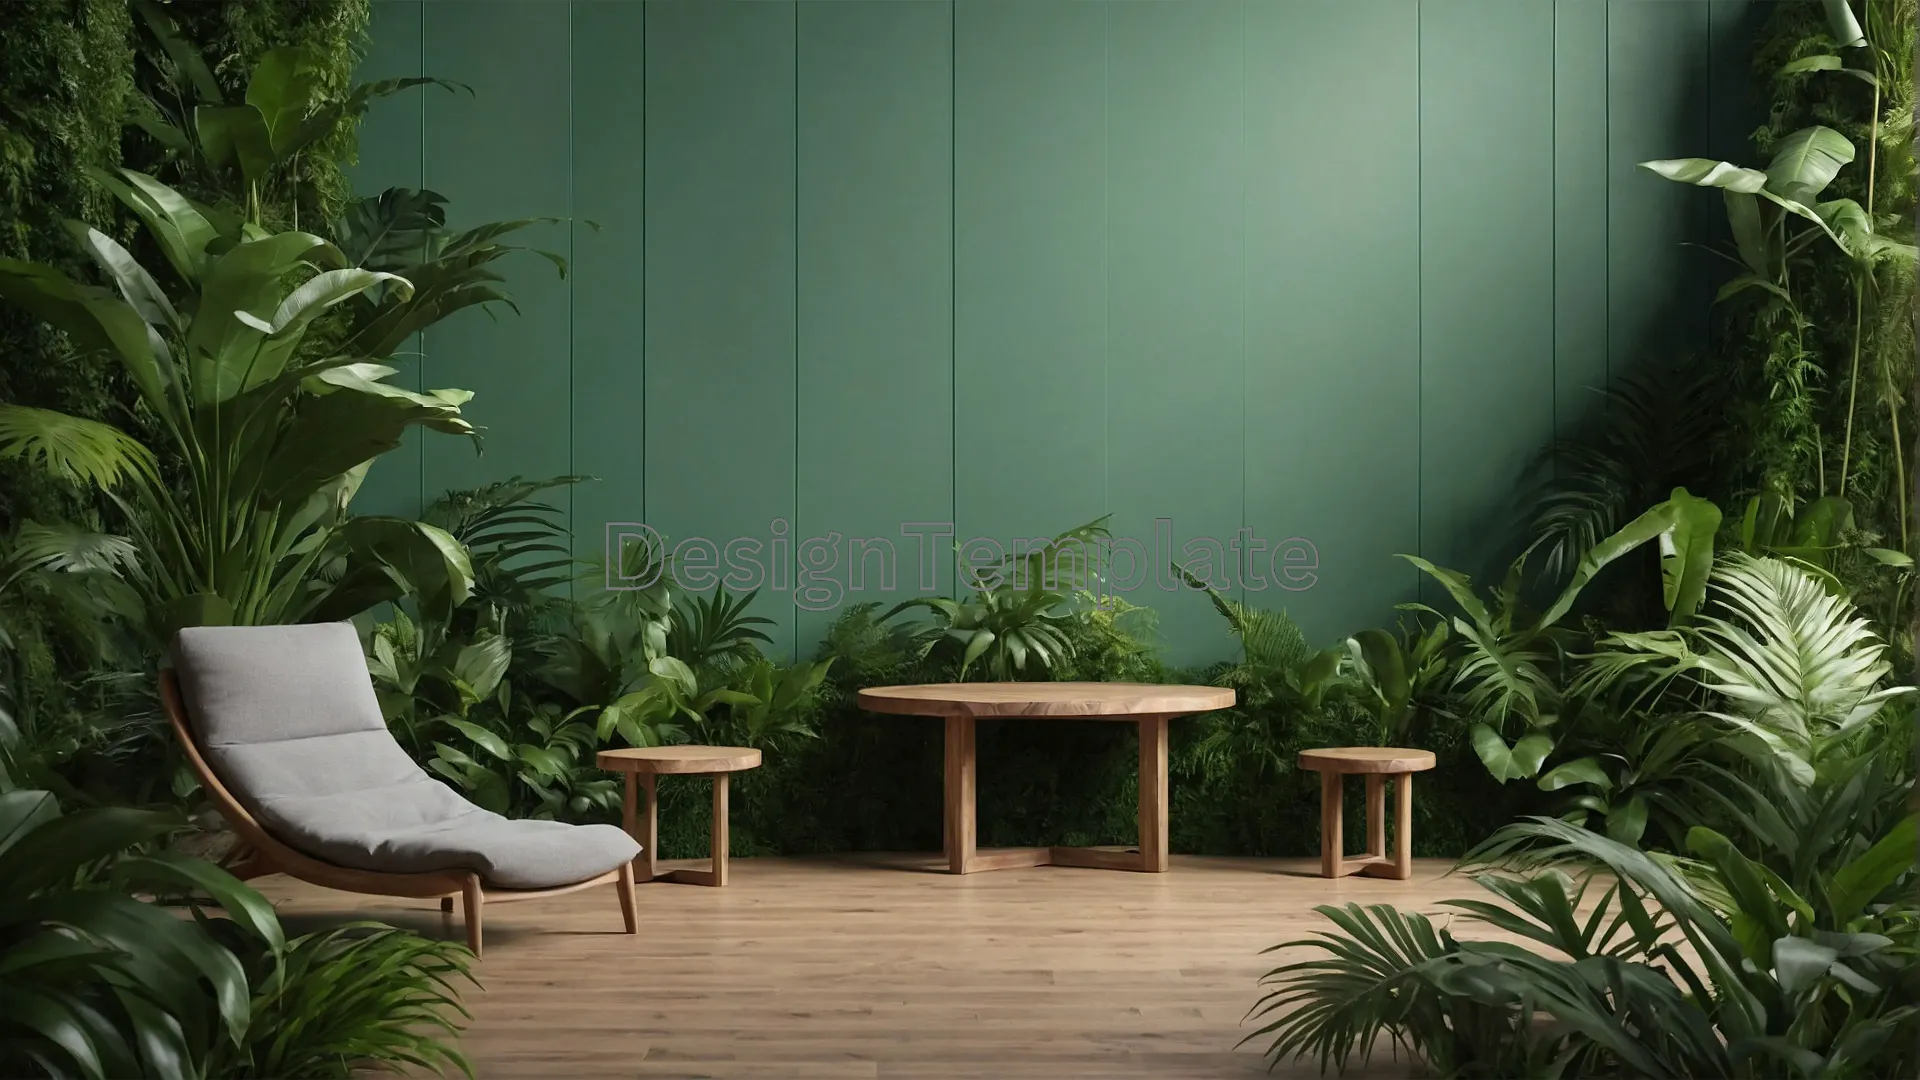 Contemporary Green Living Space Plant-Filled Room Image